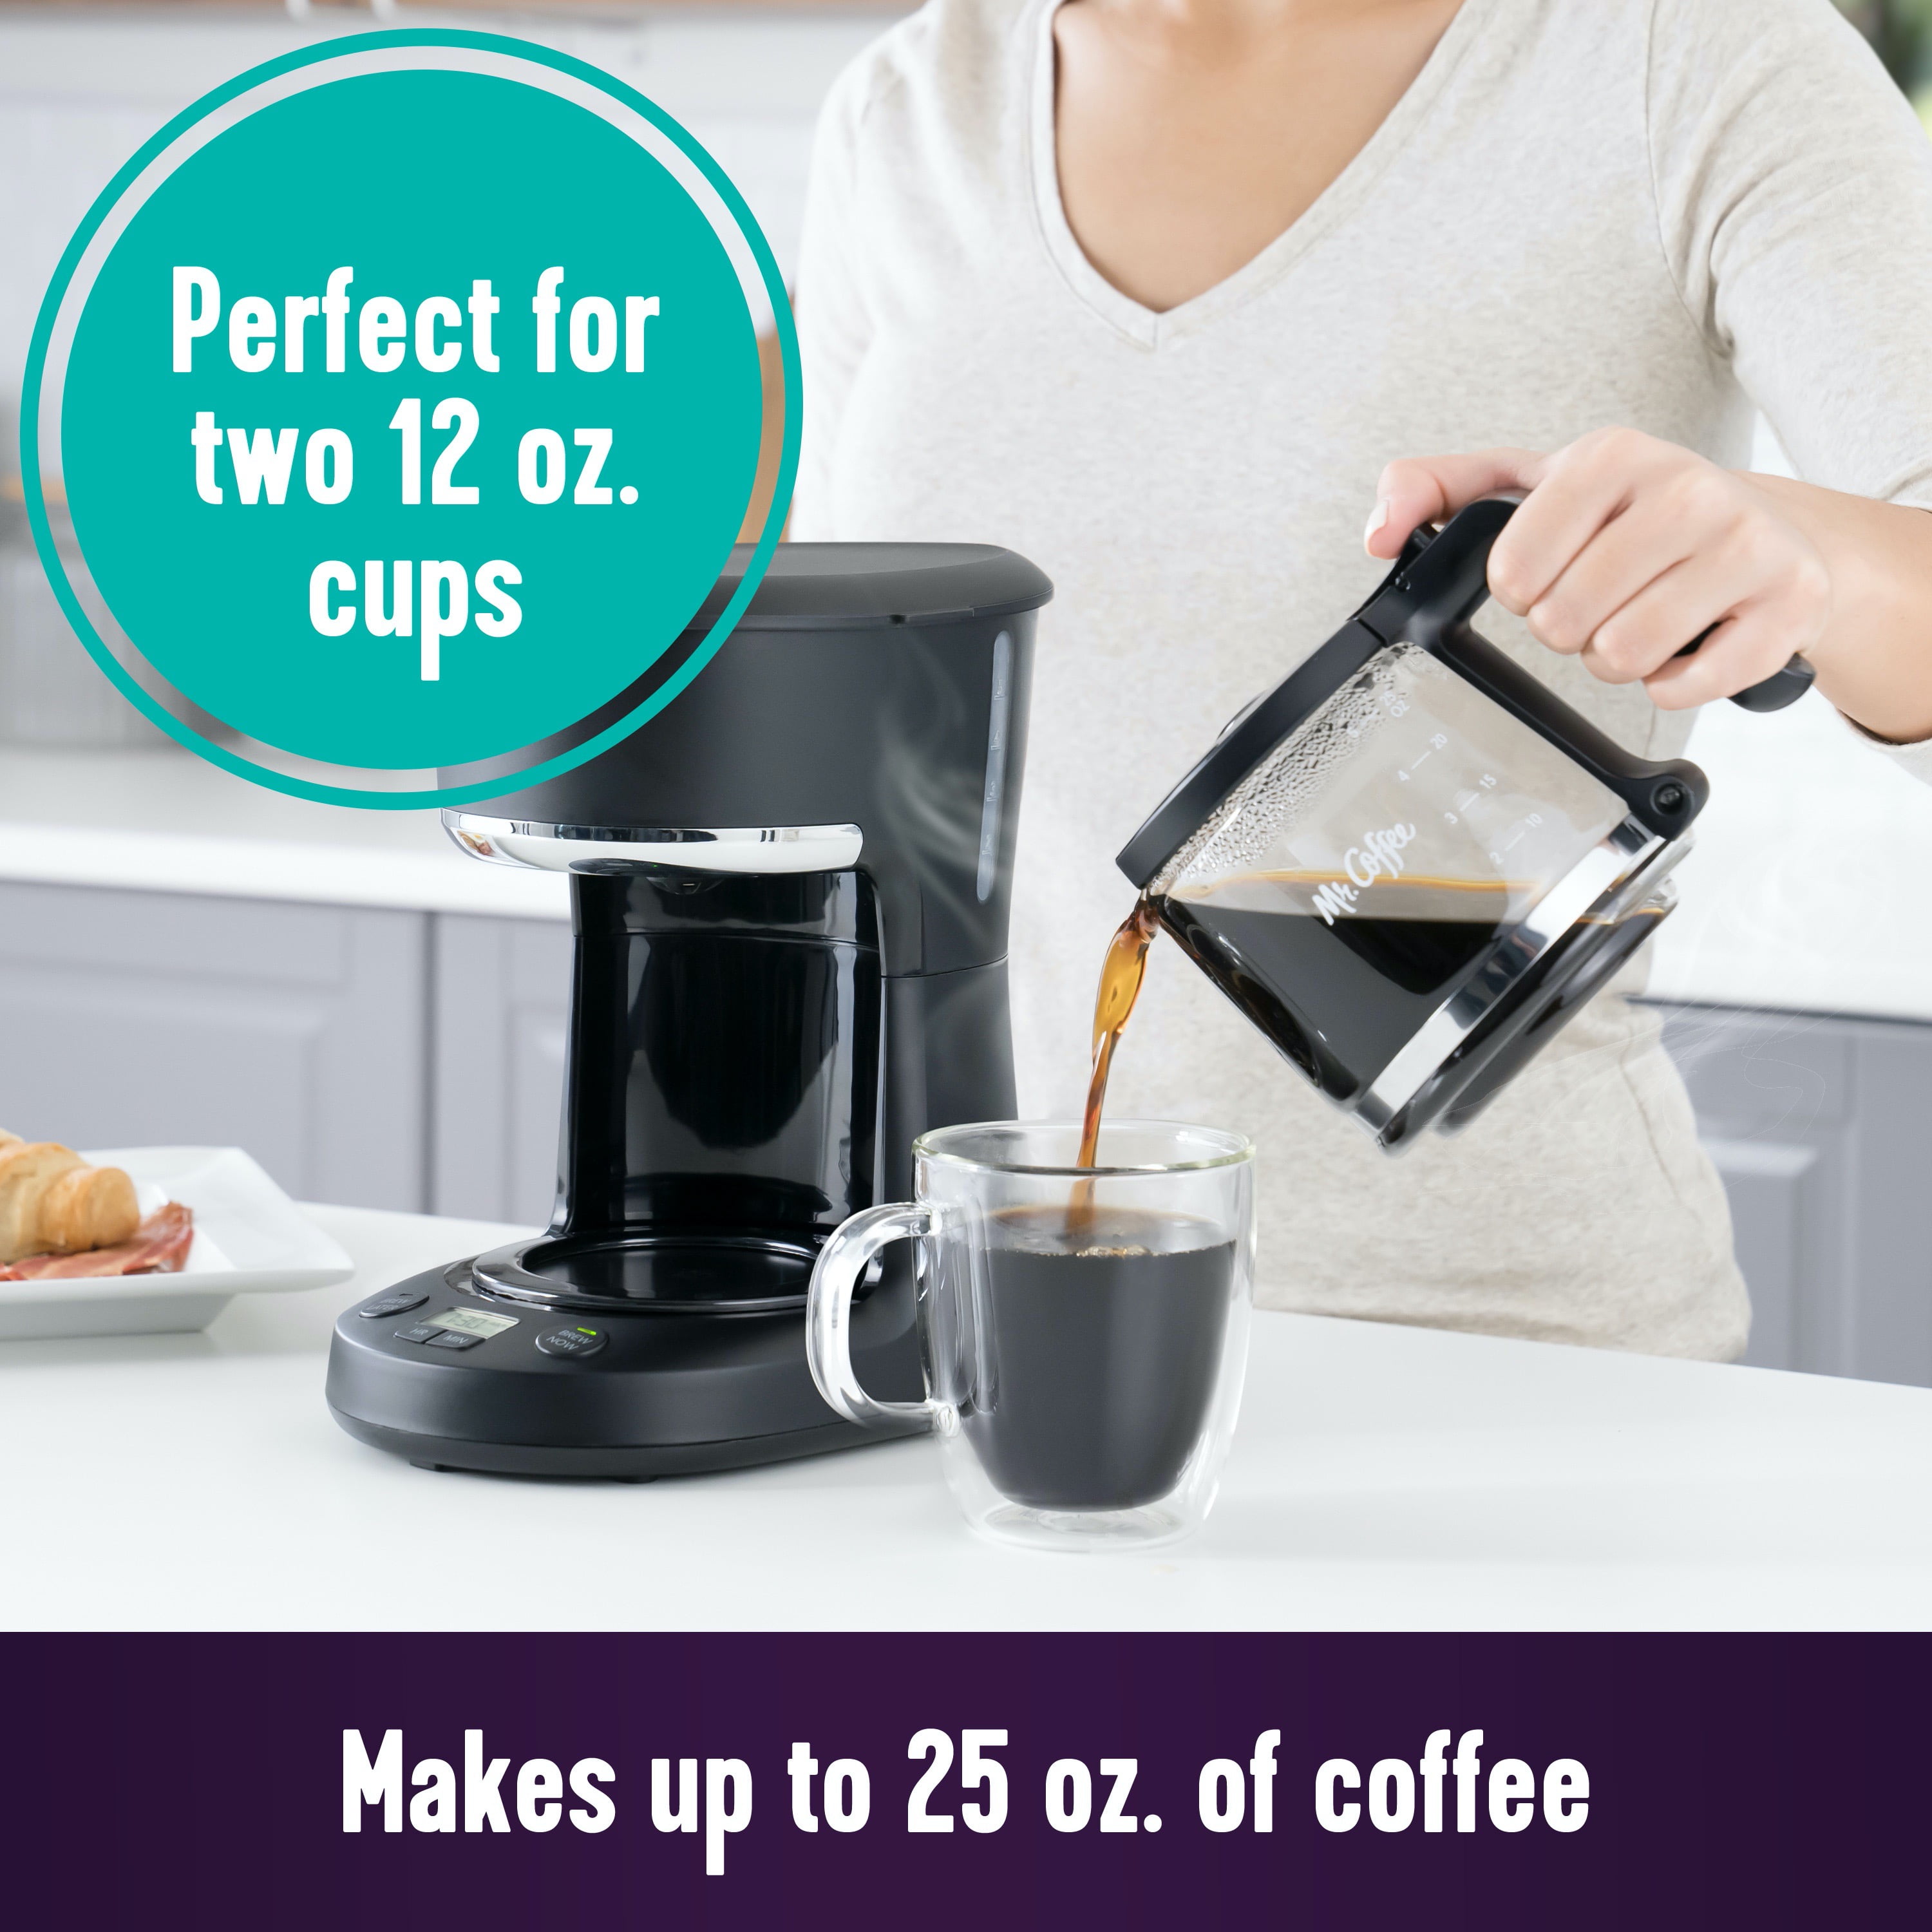 Mr. Coffee® Black/Chrome Programmable Coffee Maker, 5 c - Fry's Food Stores